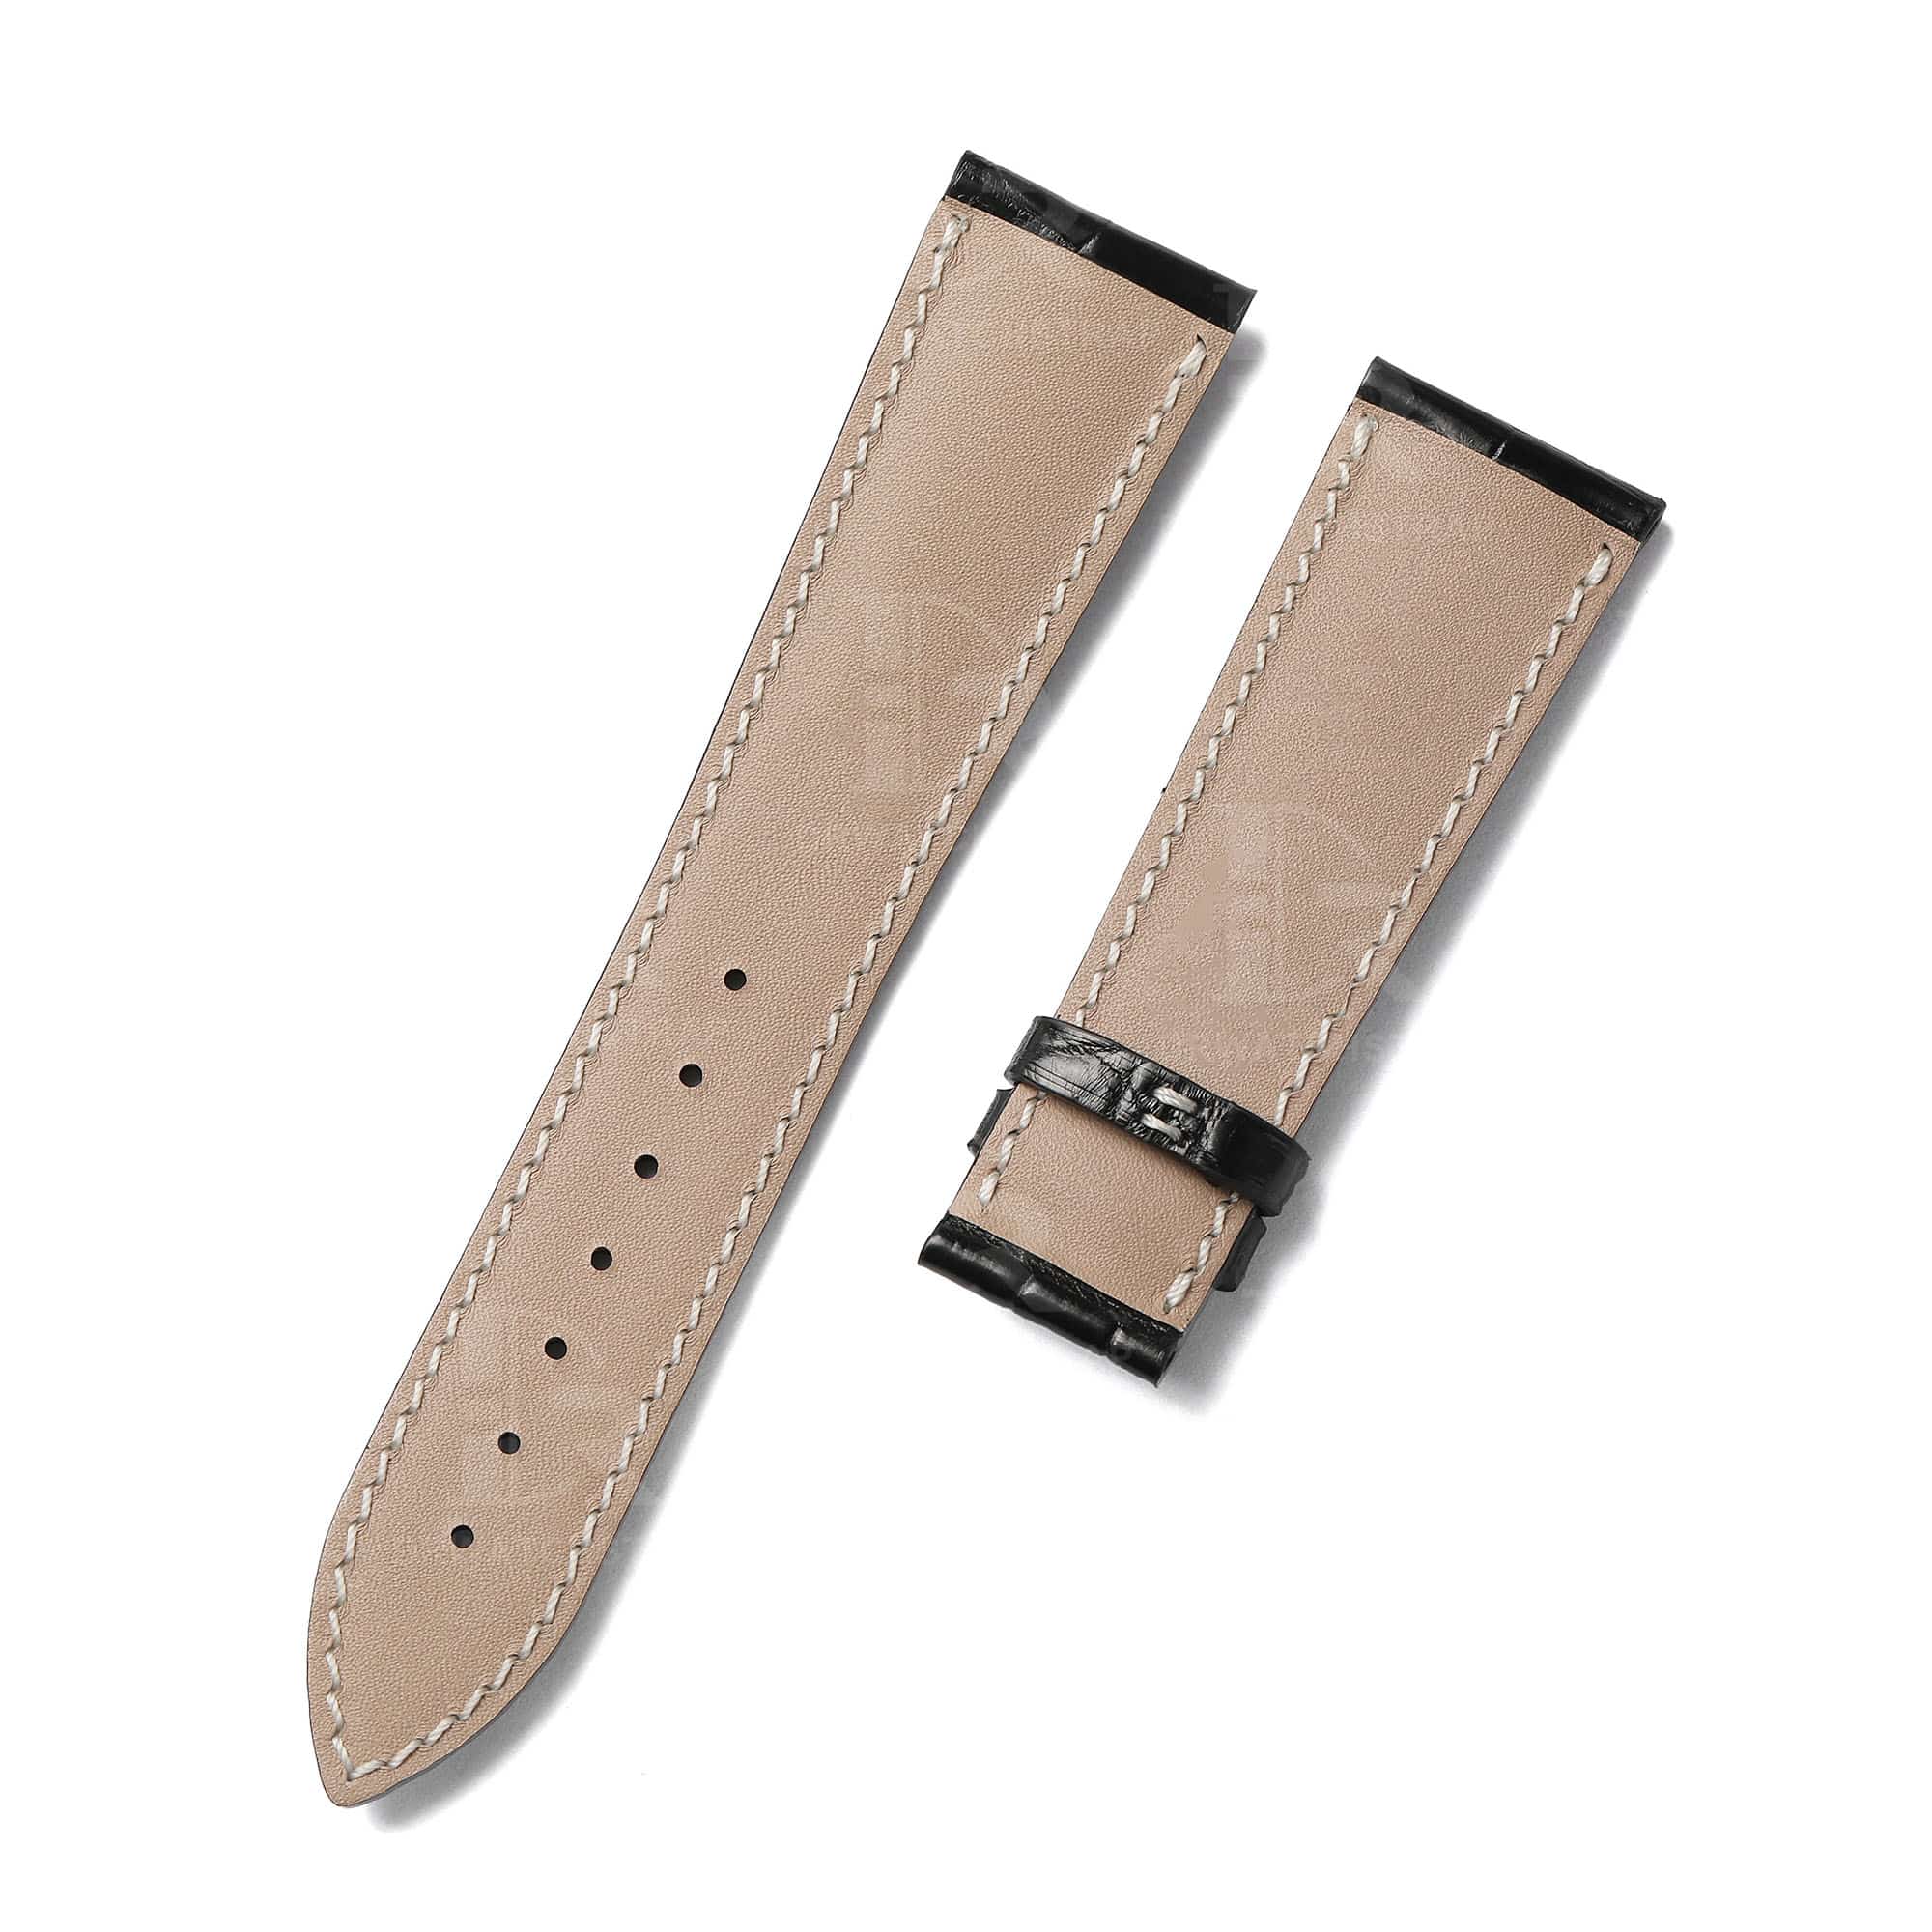 Water-resistant premium calfskin leather material linning buttom